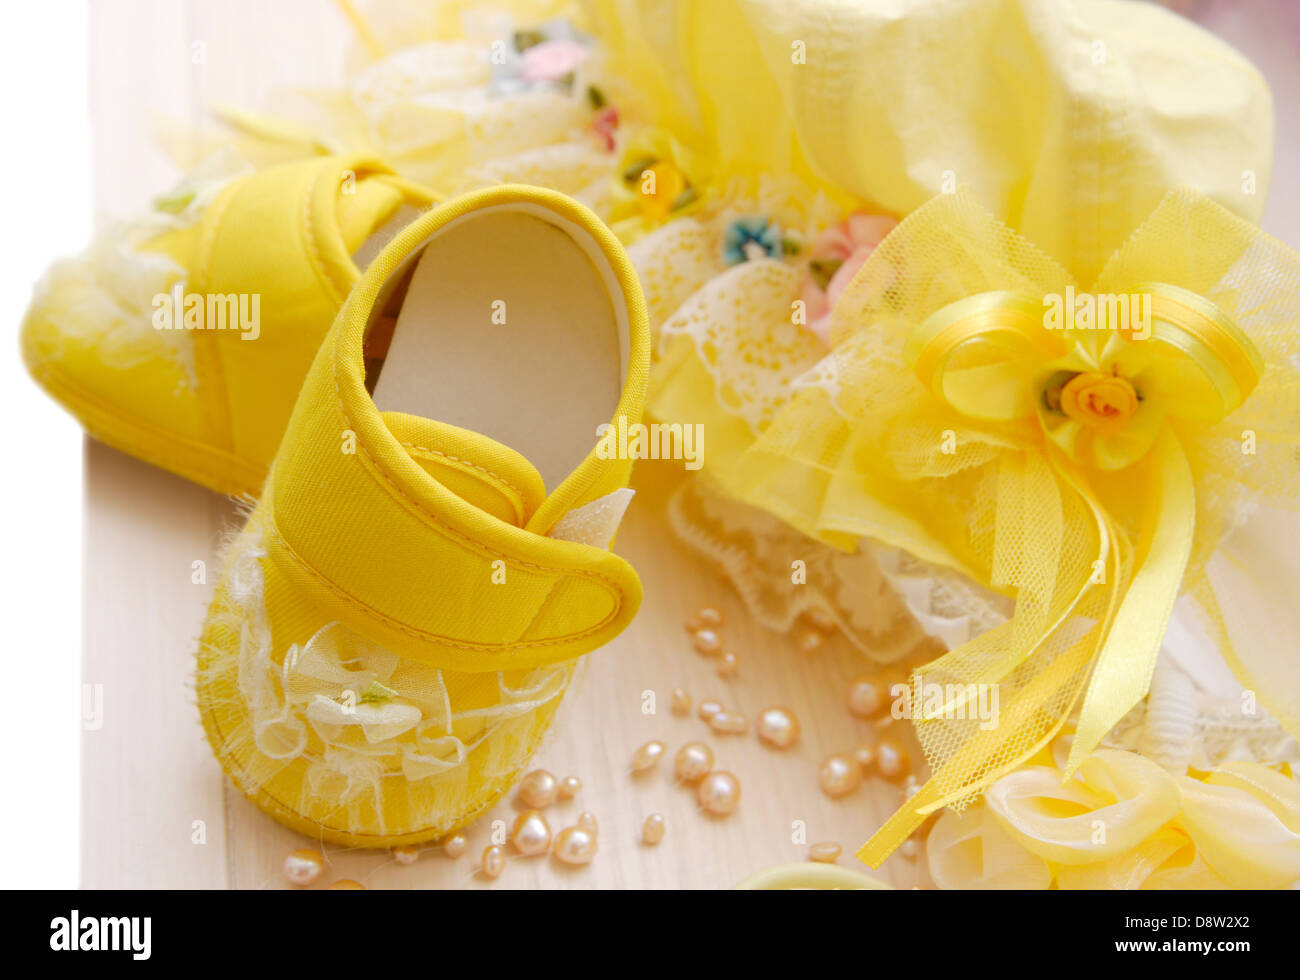 sweet yellow spruce baby's shoes Stock Photo